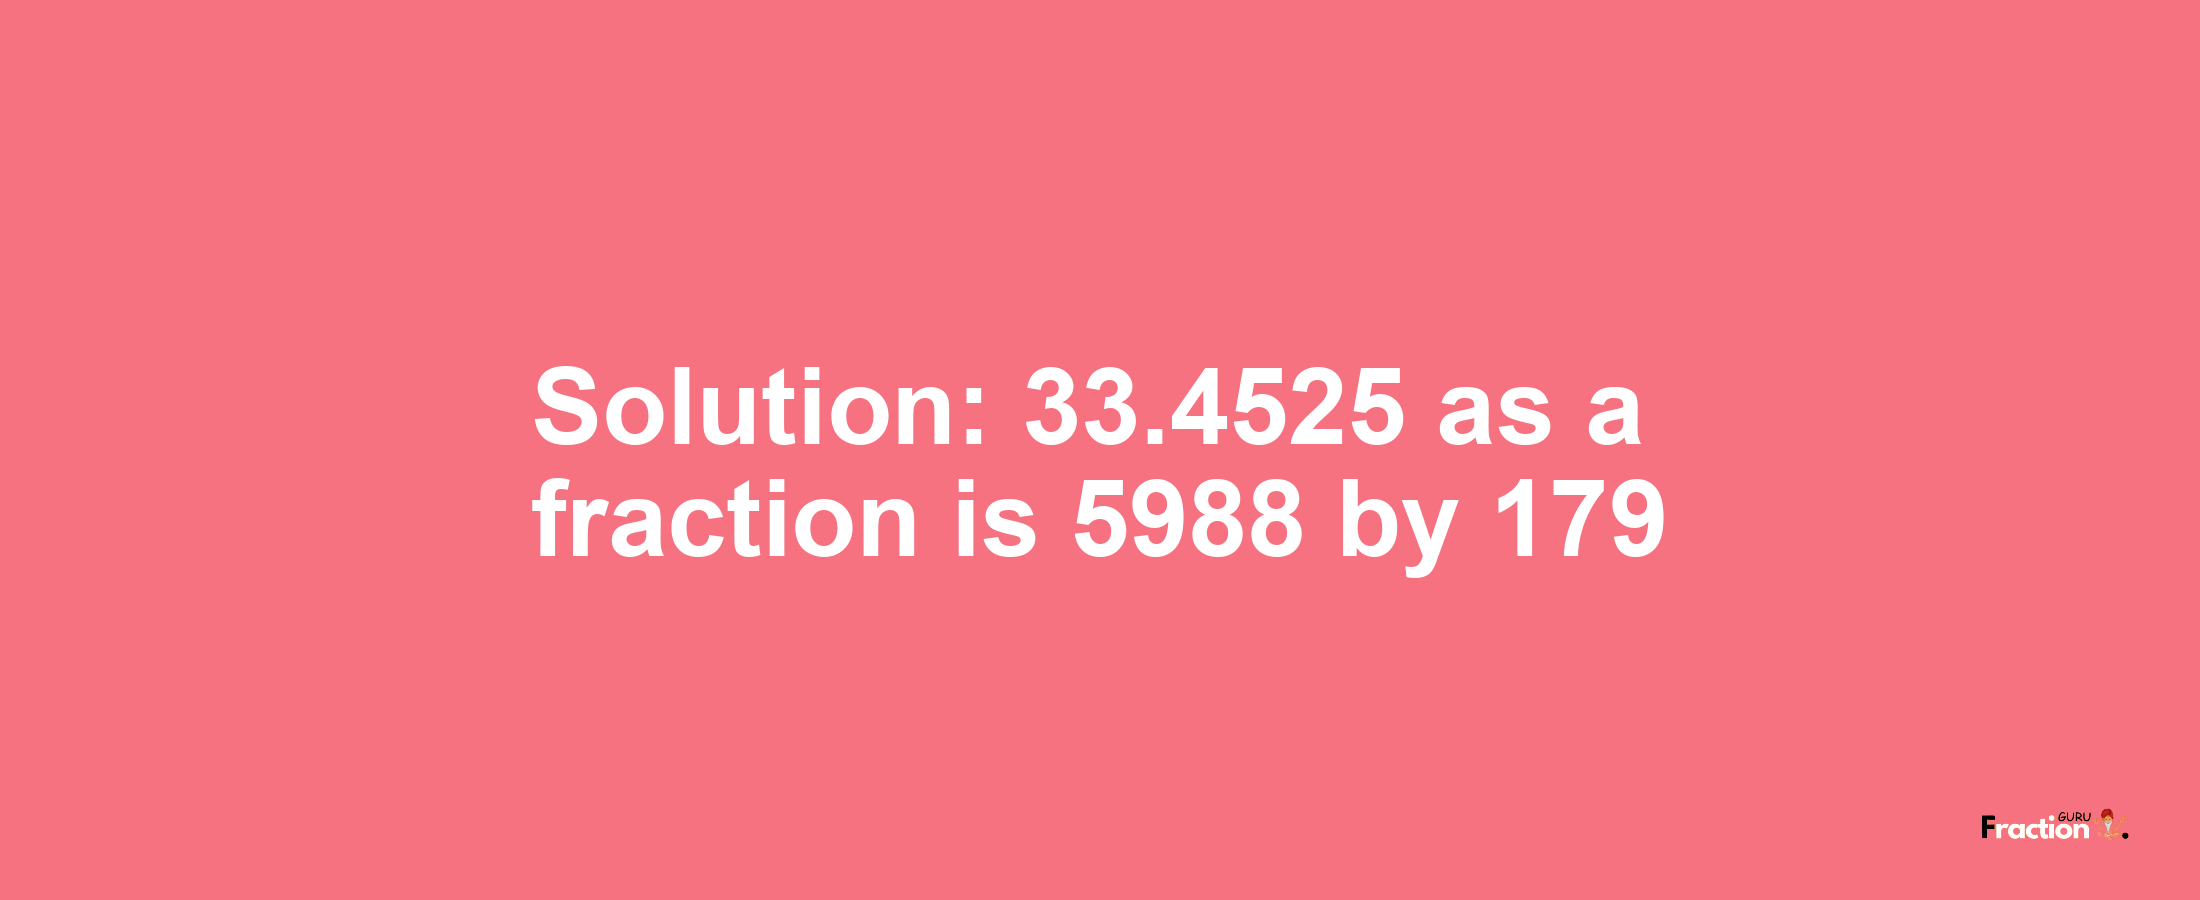 Solution:33.4525 as a fraction is 5988/179